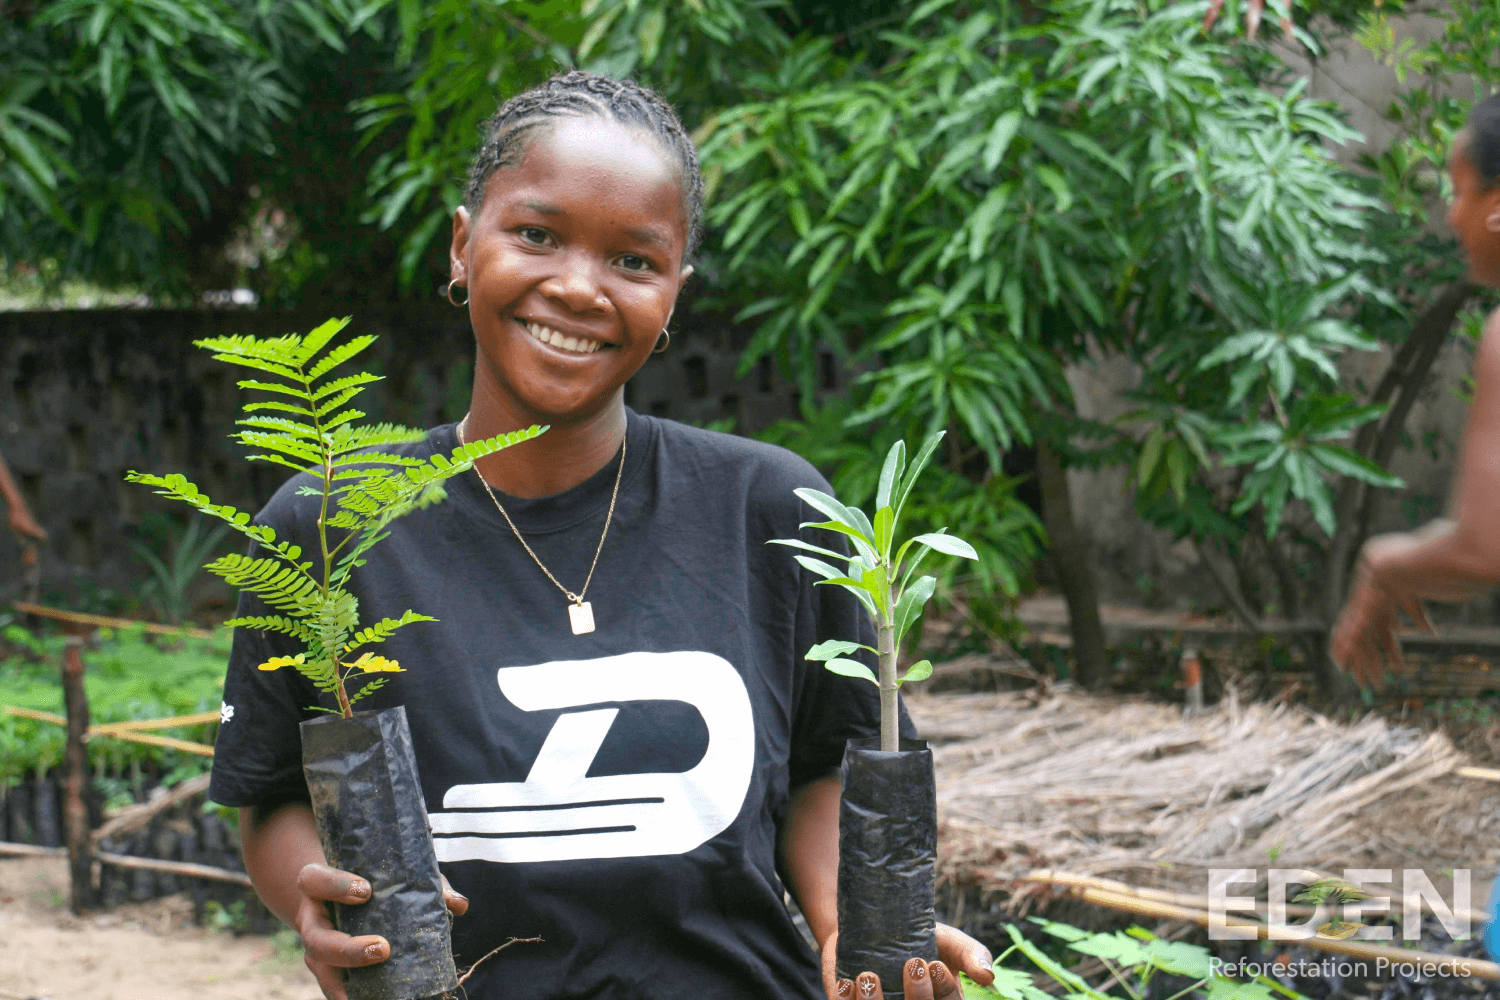 Plant trees with Vitesy and Eden Reforestation Projects